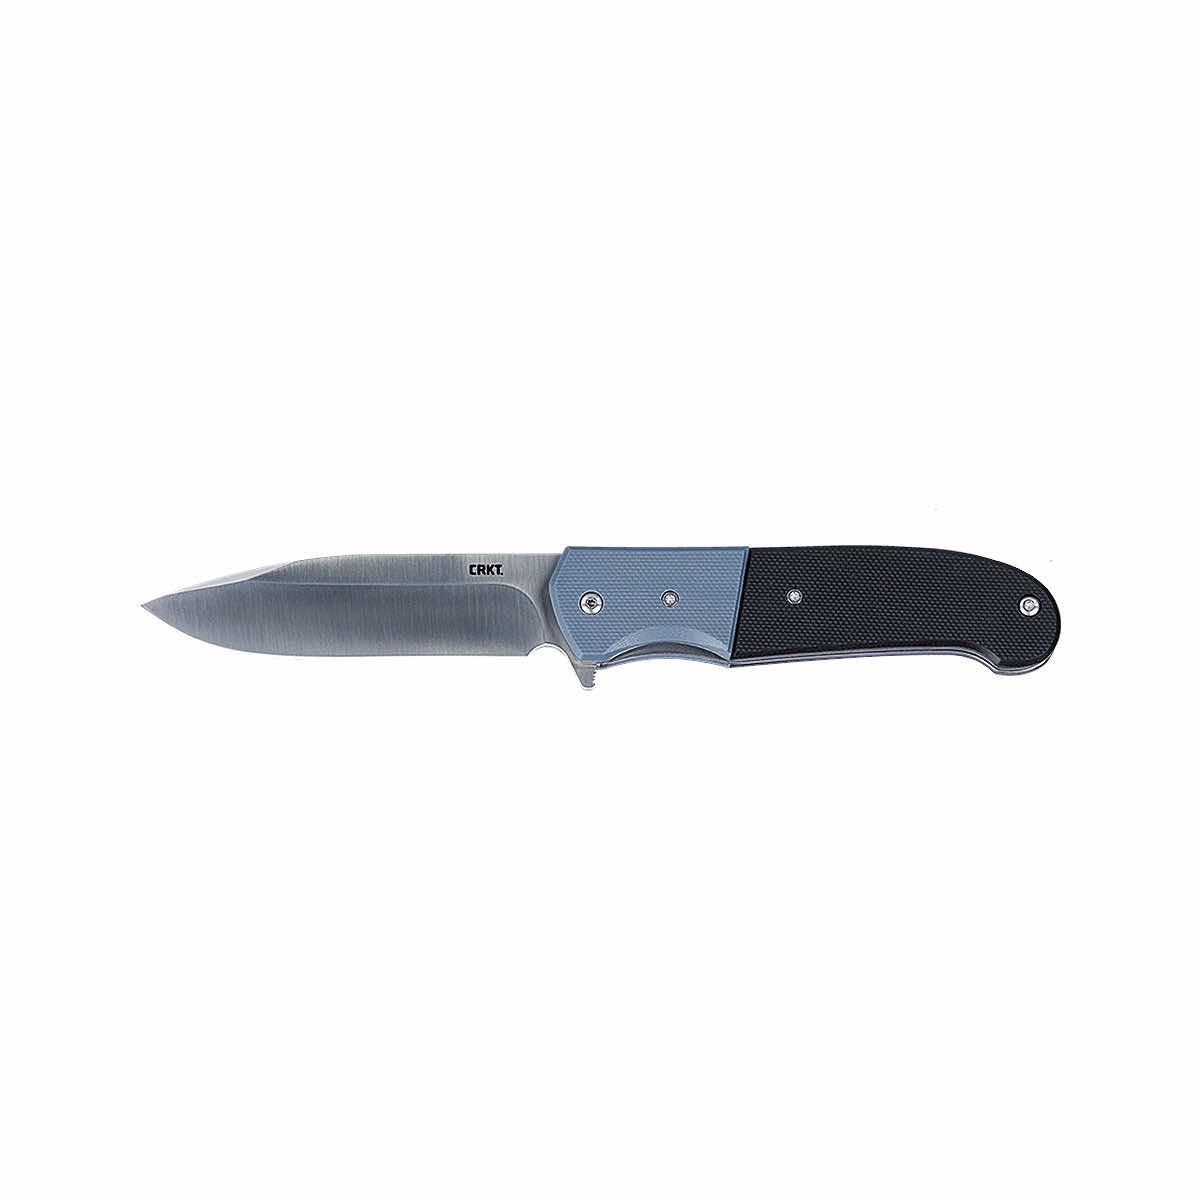  Ignitor Assisted Knife